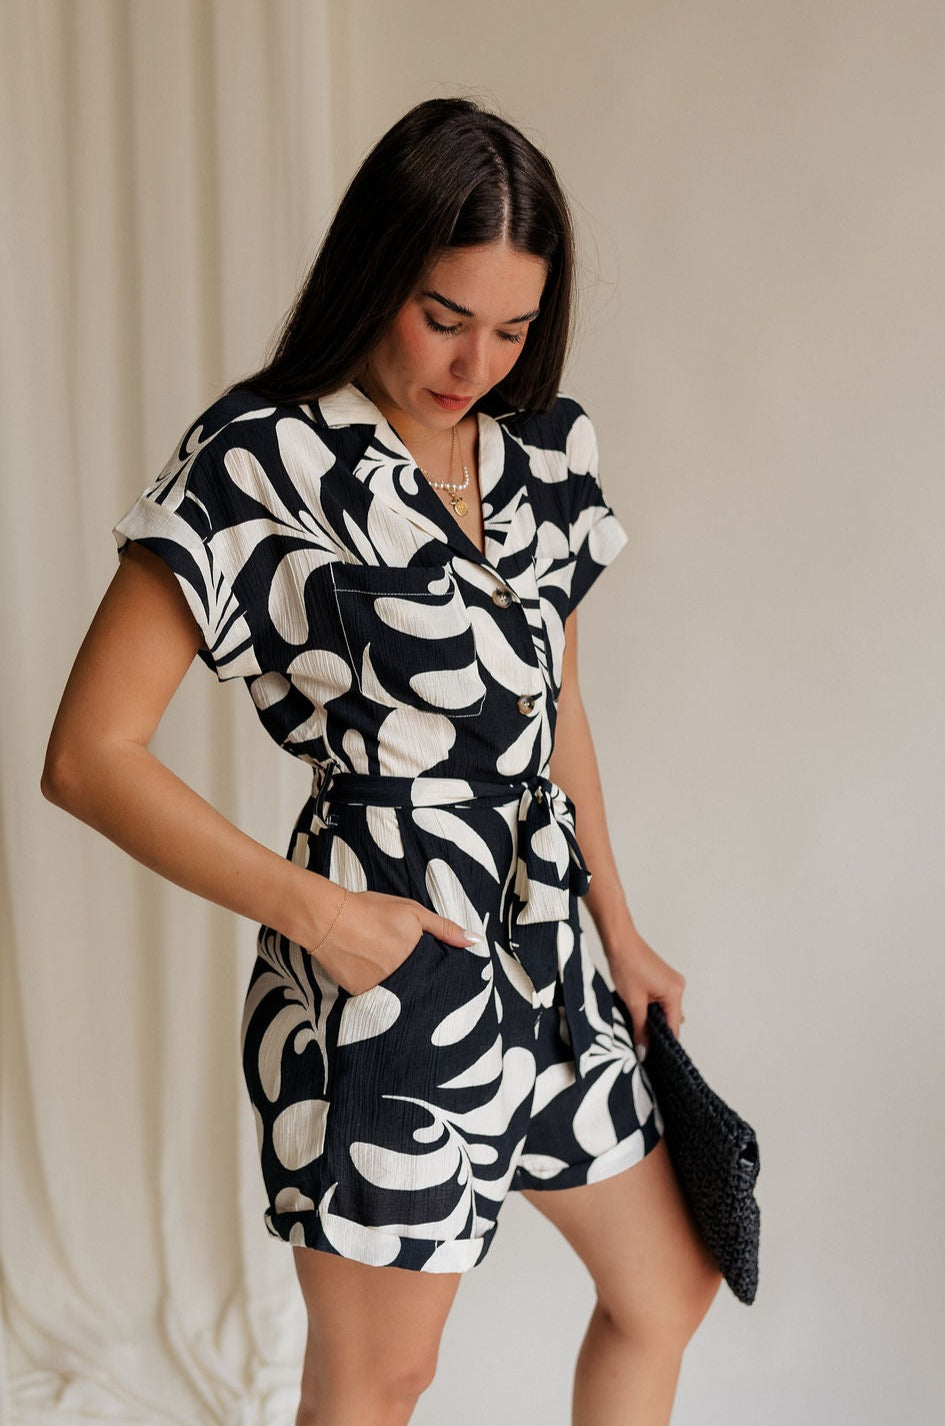 Frontal side view of model wearing the Melanie Black & Cream Printed Romper that has black and cream fabric with a swirl print, a button up front, collar, tie belt, and short sleeves. 